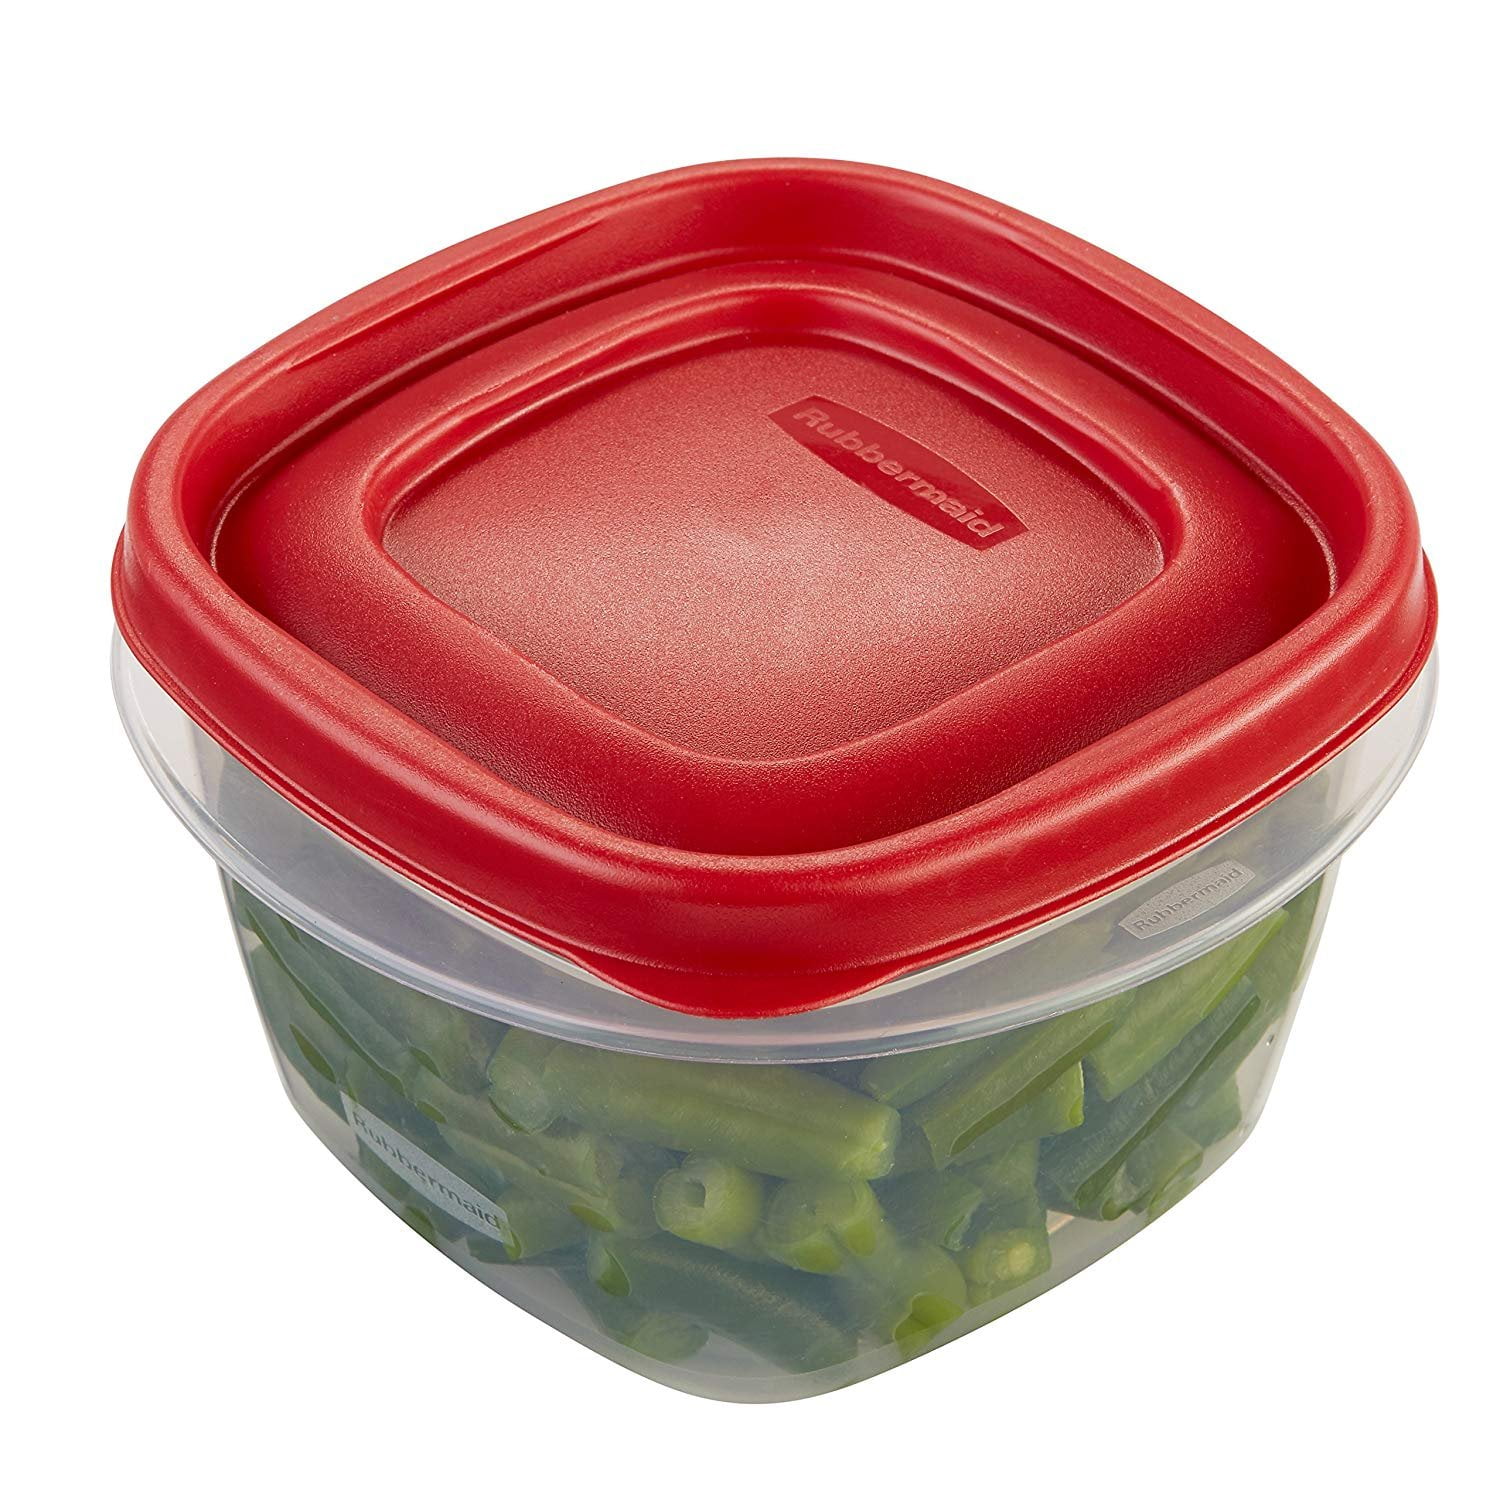 Rubbermaid® Easy-Find Lids Two-Cup Food Storage Container, 2 pk